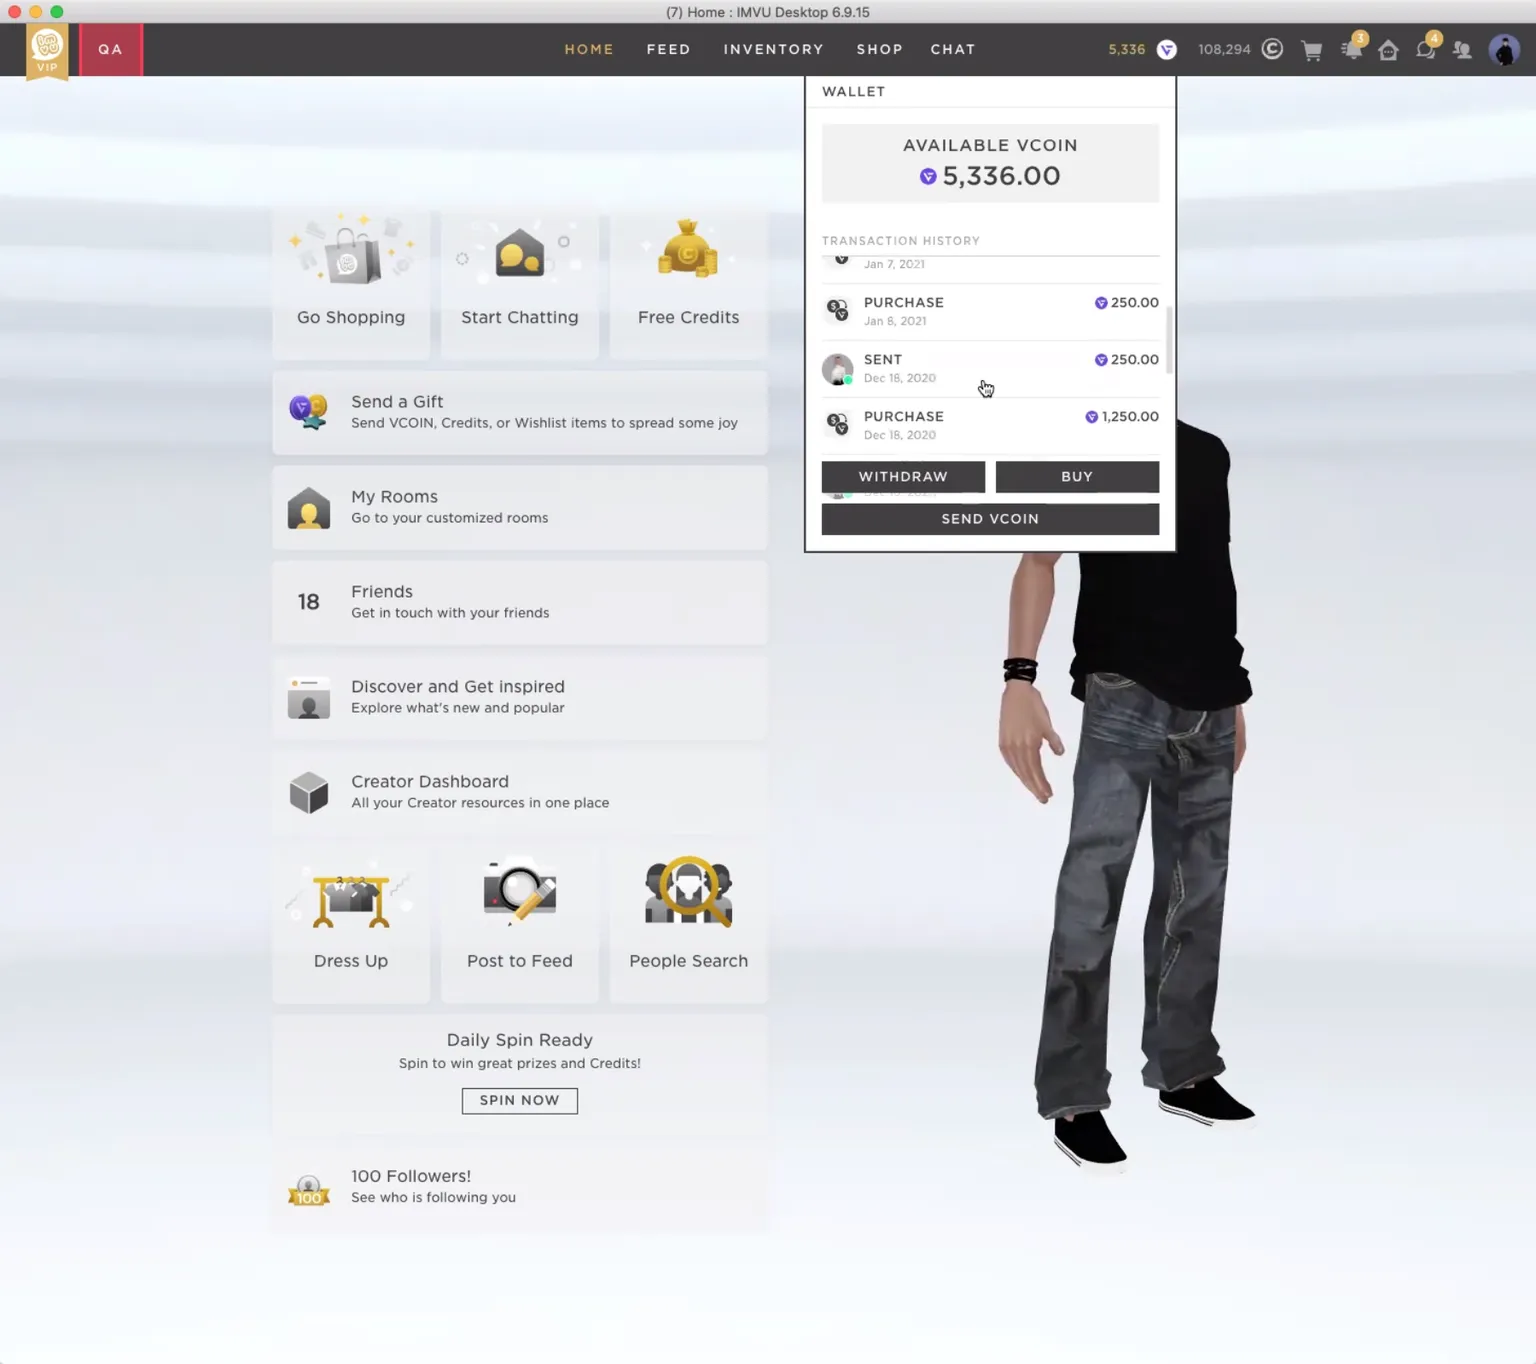 One of IMVU's interfaces for purchasing VCOIN